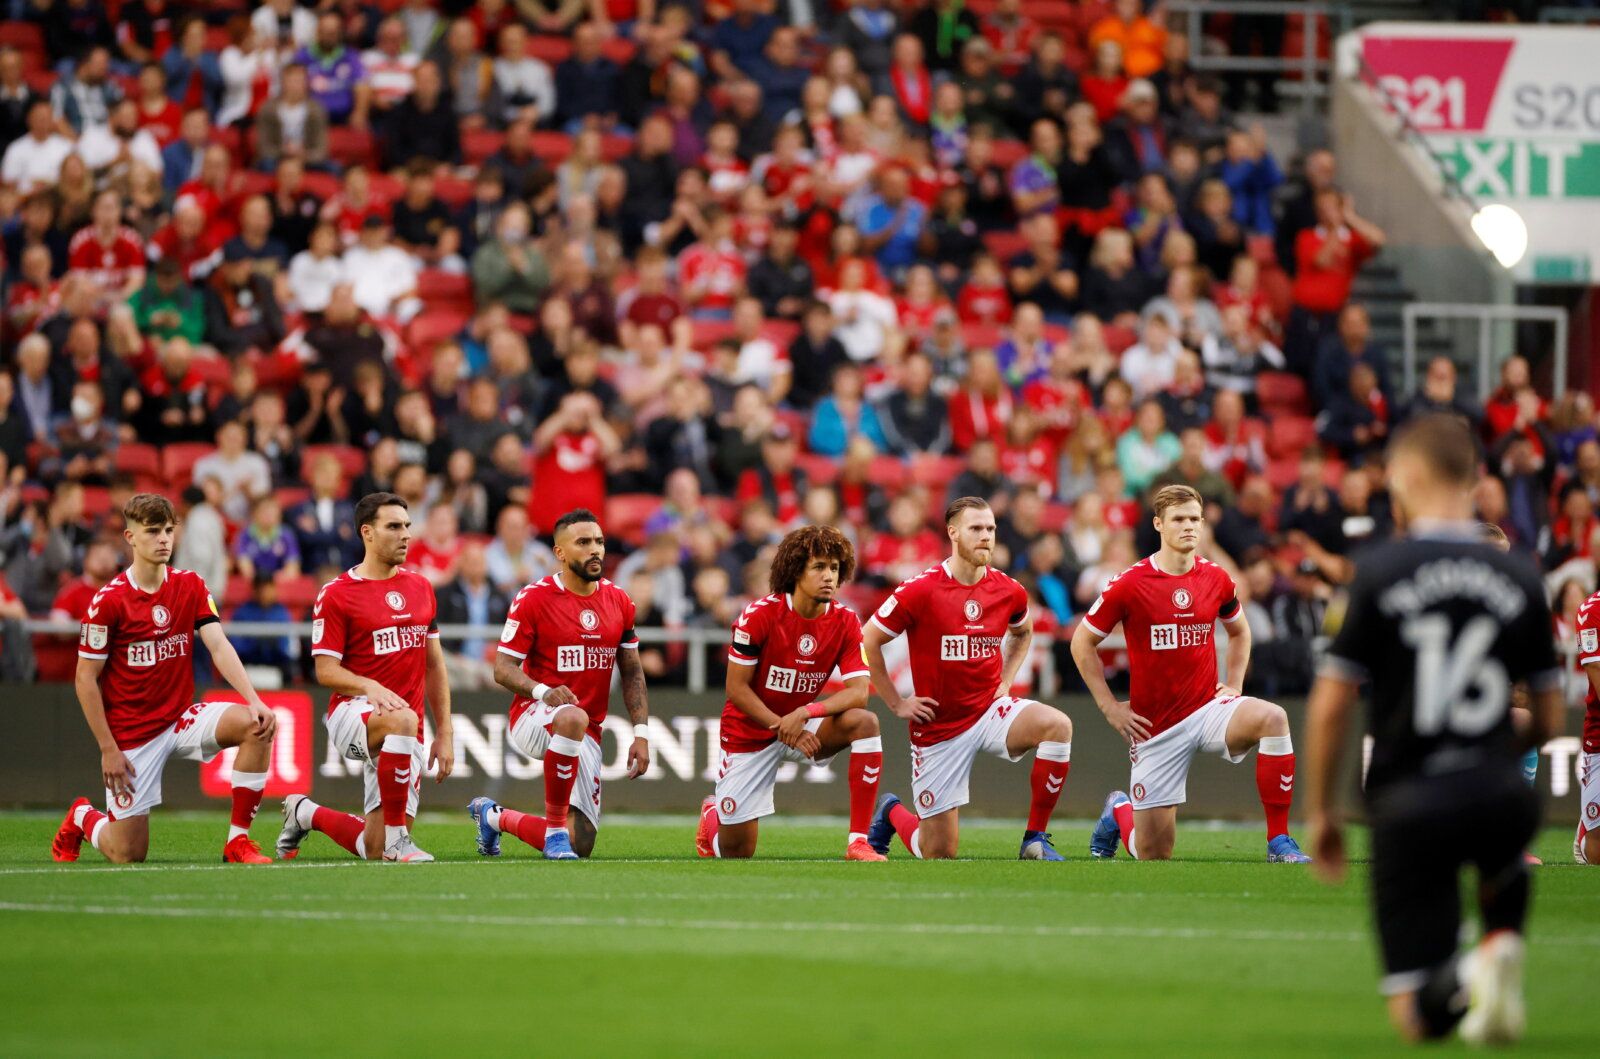 Soccer Football - Championship - Bristol City v Swansea City - Ashton Gate Stadium, Bristol, Britain - August 20, 2021  Bristol City players take a knee before teh match  Action Images/John Sibley  EDITORIAL USE ONLY. No use with unauthorized audio, video, data, fixture lists, club/league logos or 